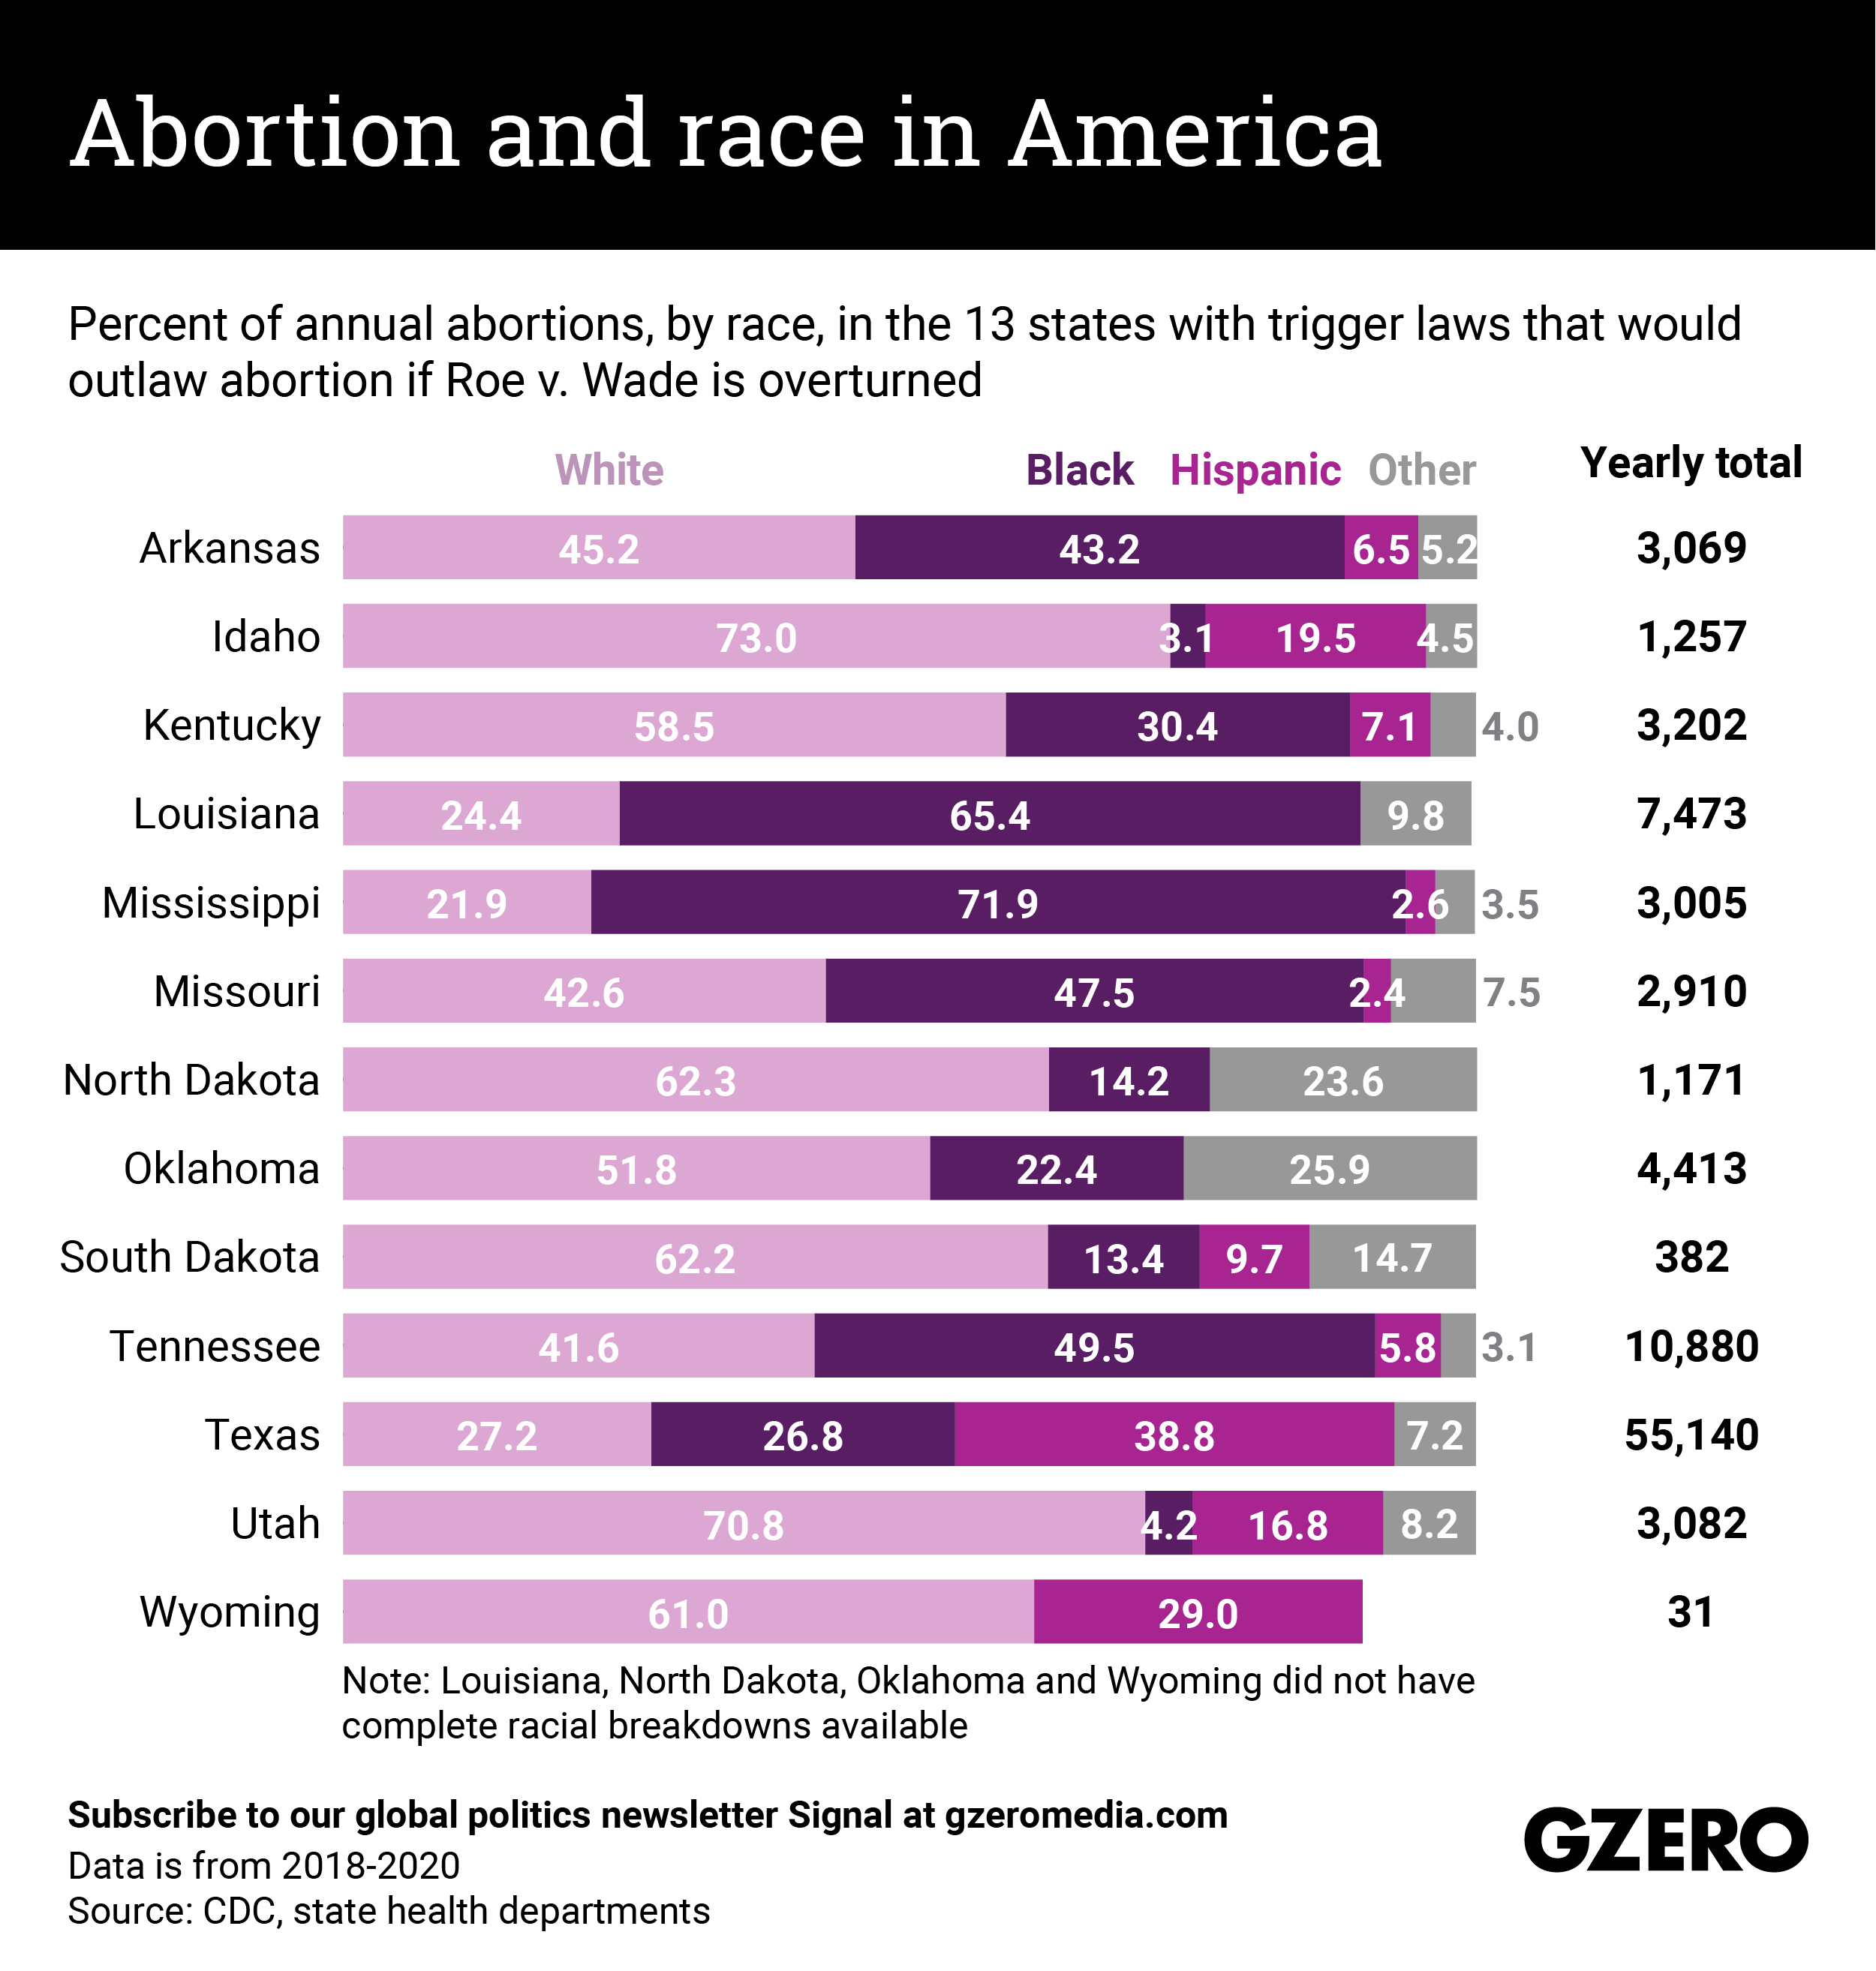 The Graphic Truth: Abortion and race in America